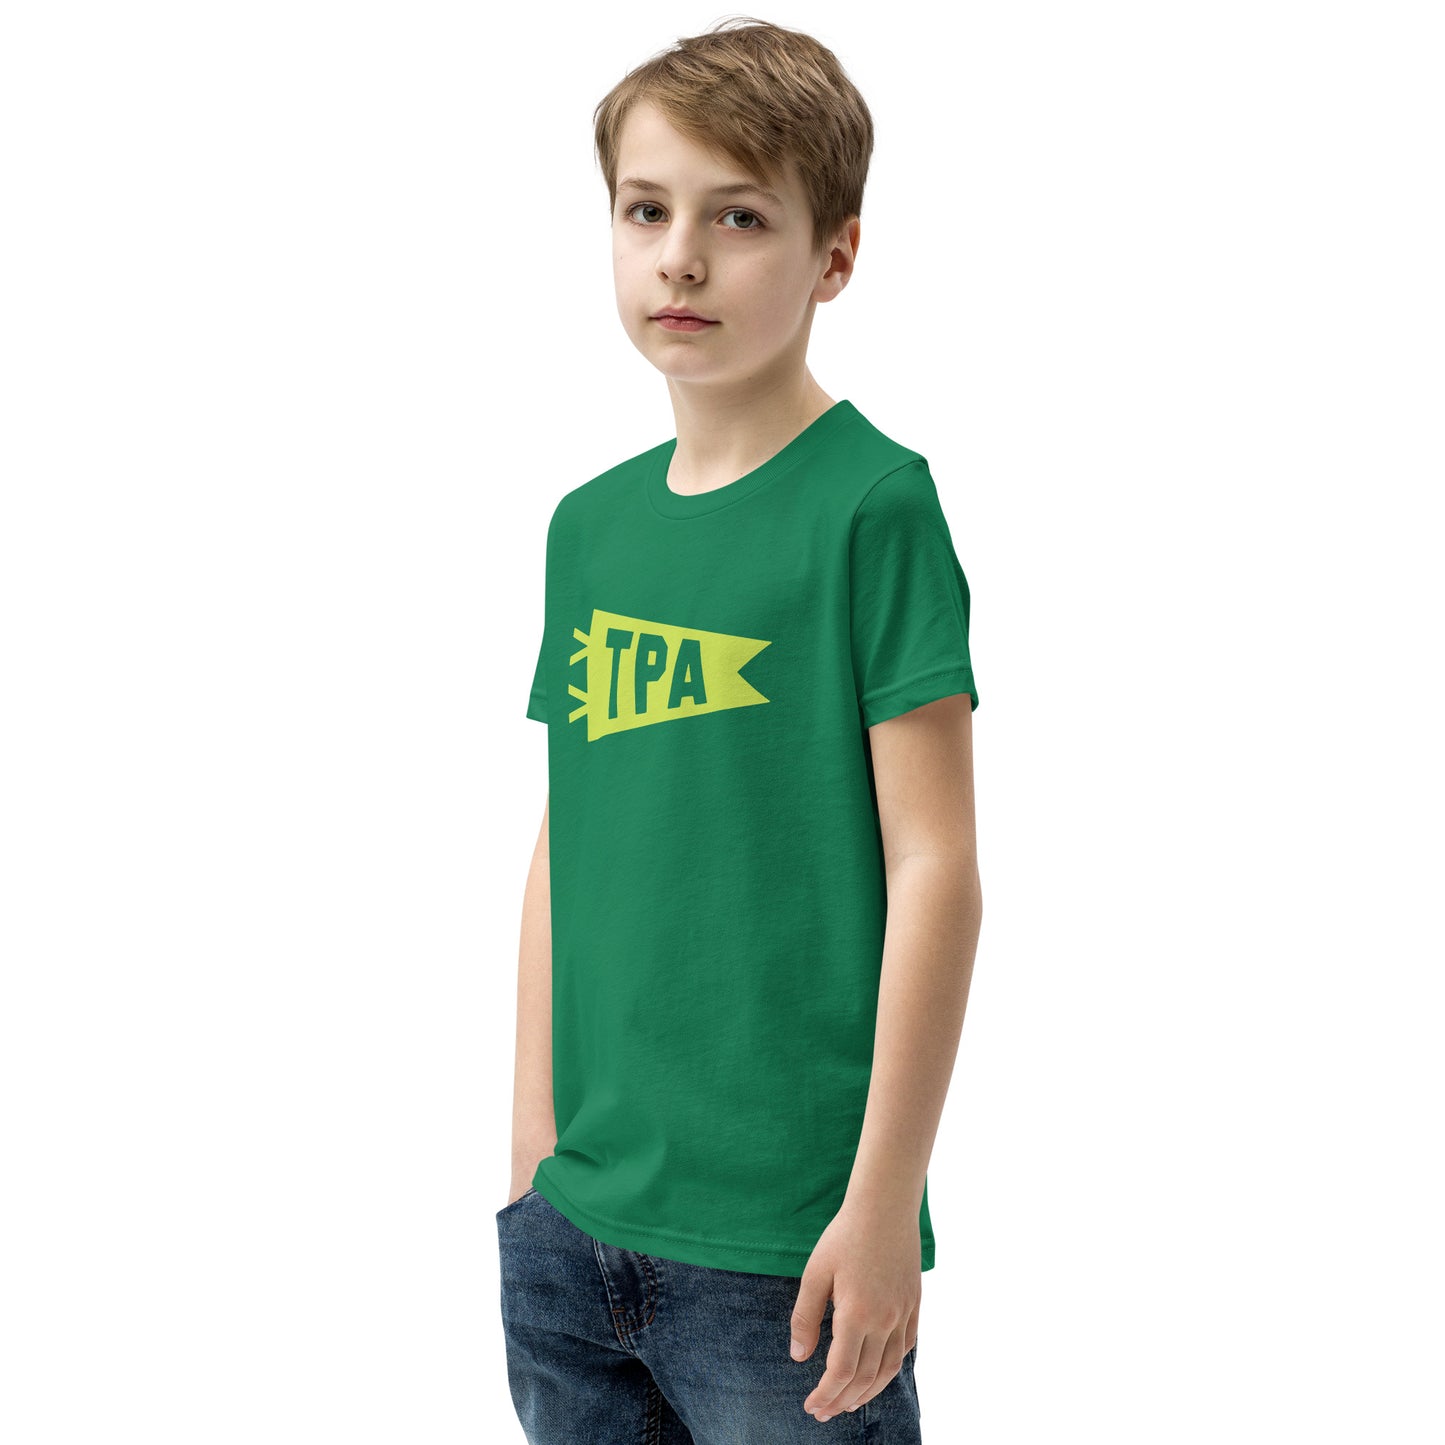 Kid's Airport Code Tee - Green Graphic • TPA Tampa • YHM Designs - Image 06